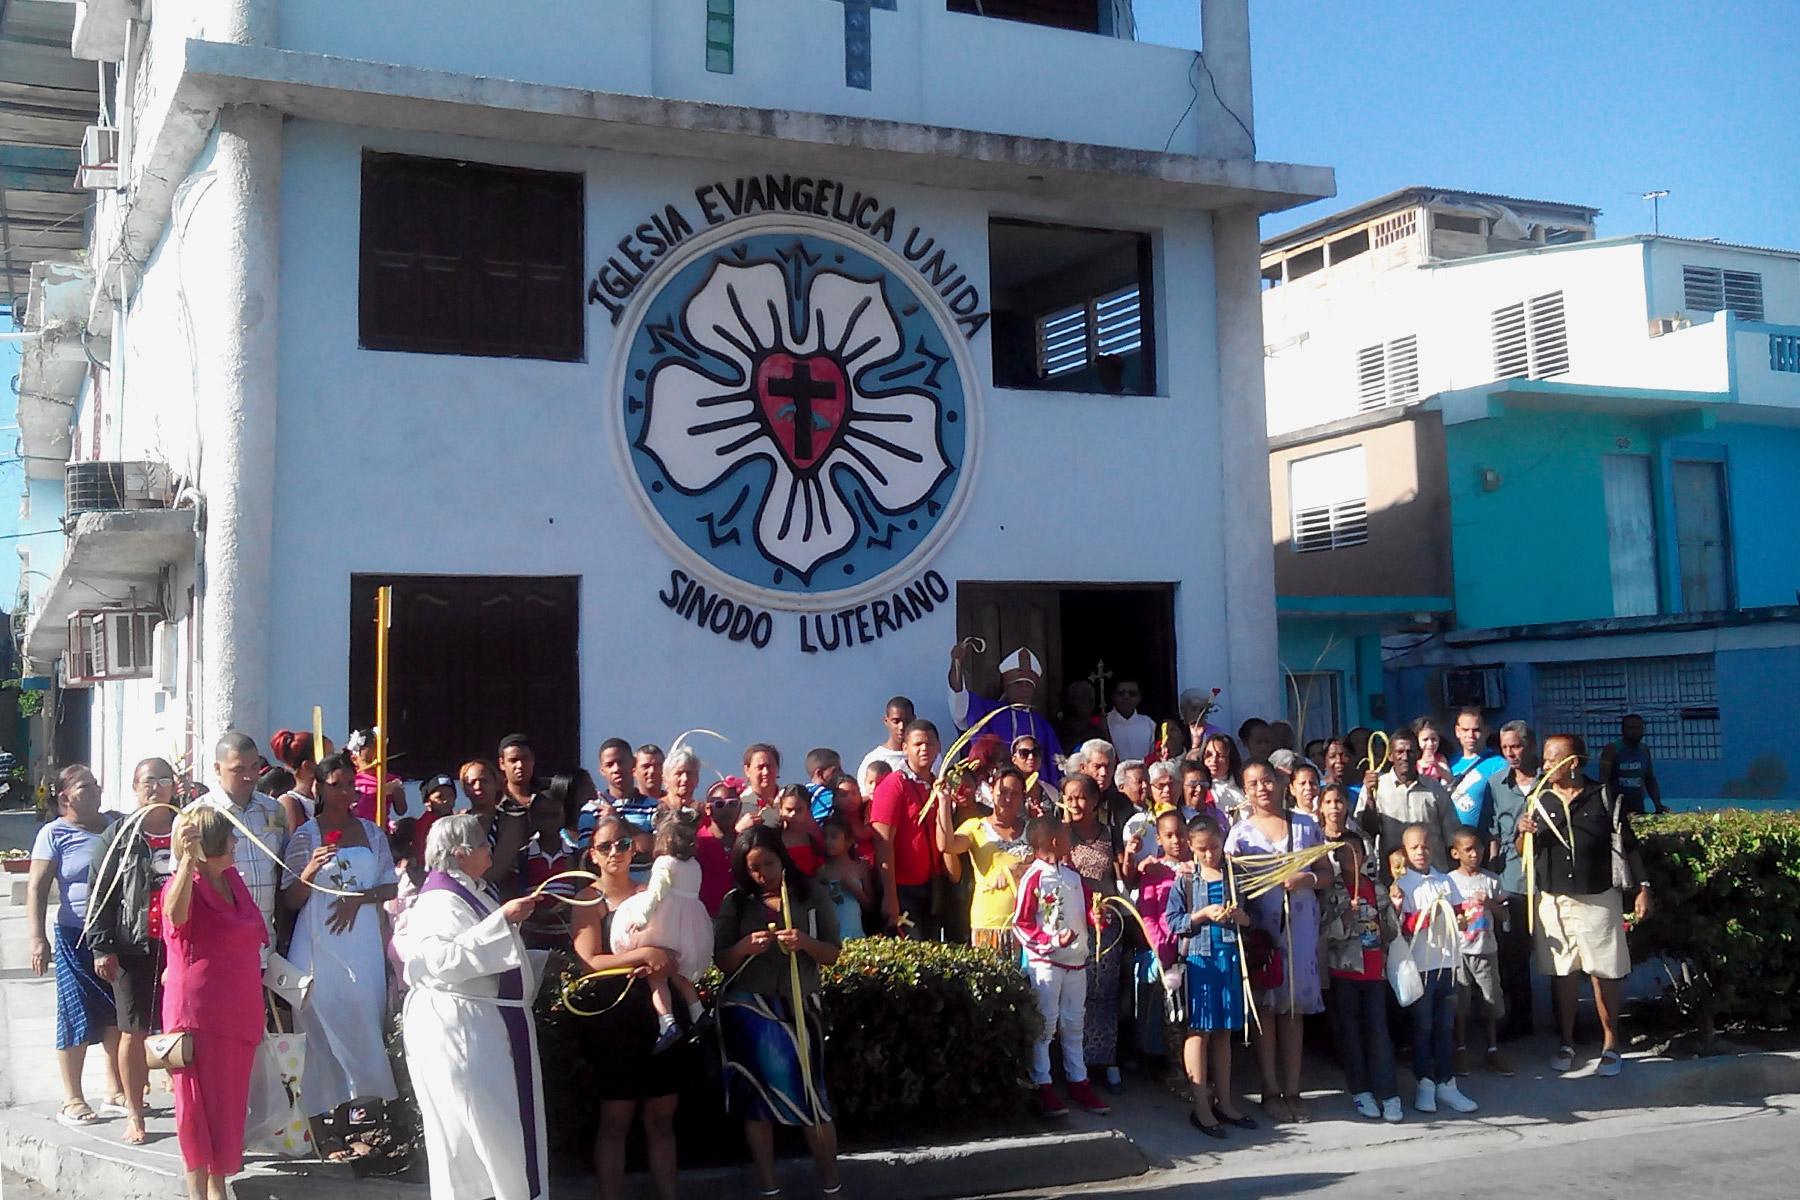 A congregation of new LWF member church the United Evangelical Church in Cuba Lutheran Synod meets in Santiago de Cuba. The church has more female ordained leaders than male. Photo: United Evangelical Church in Cuba Lutheran Synod